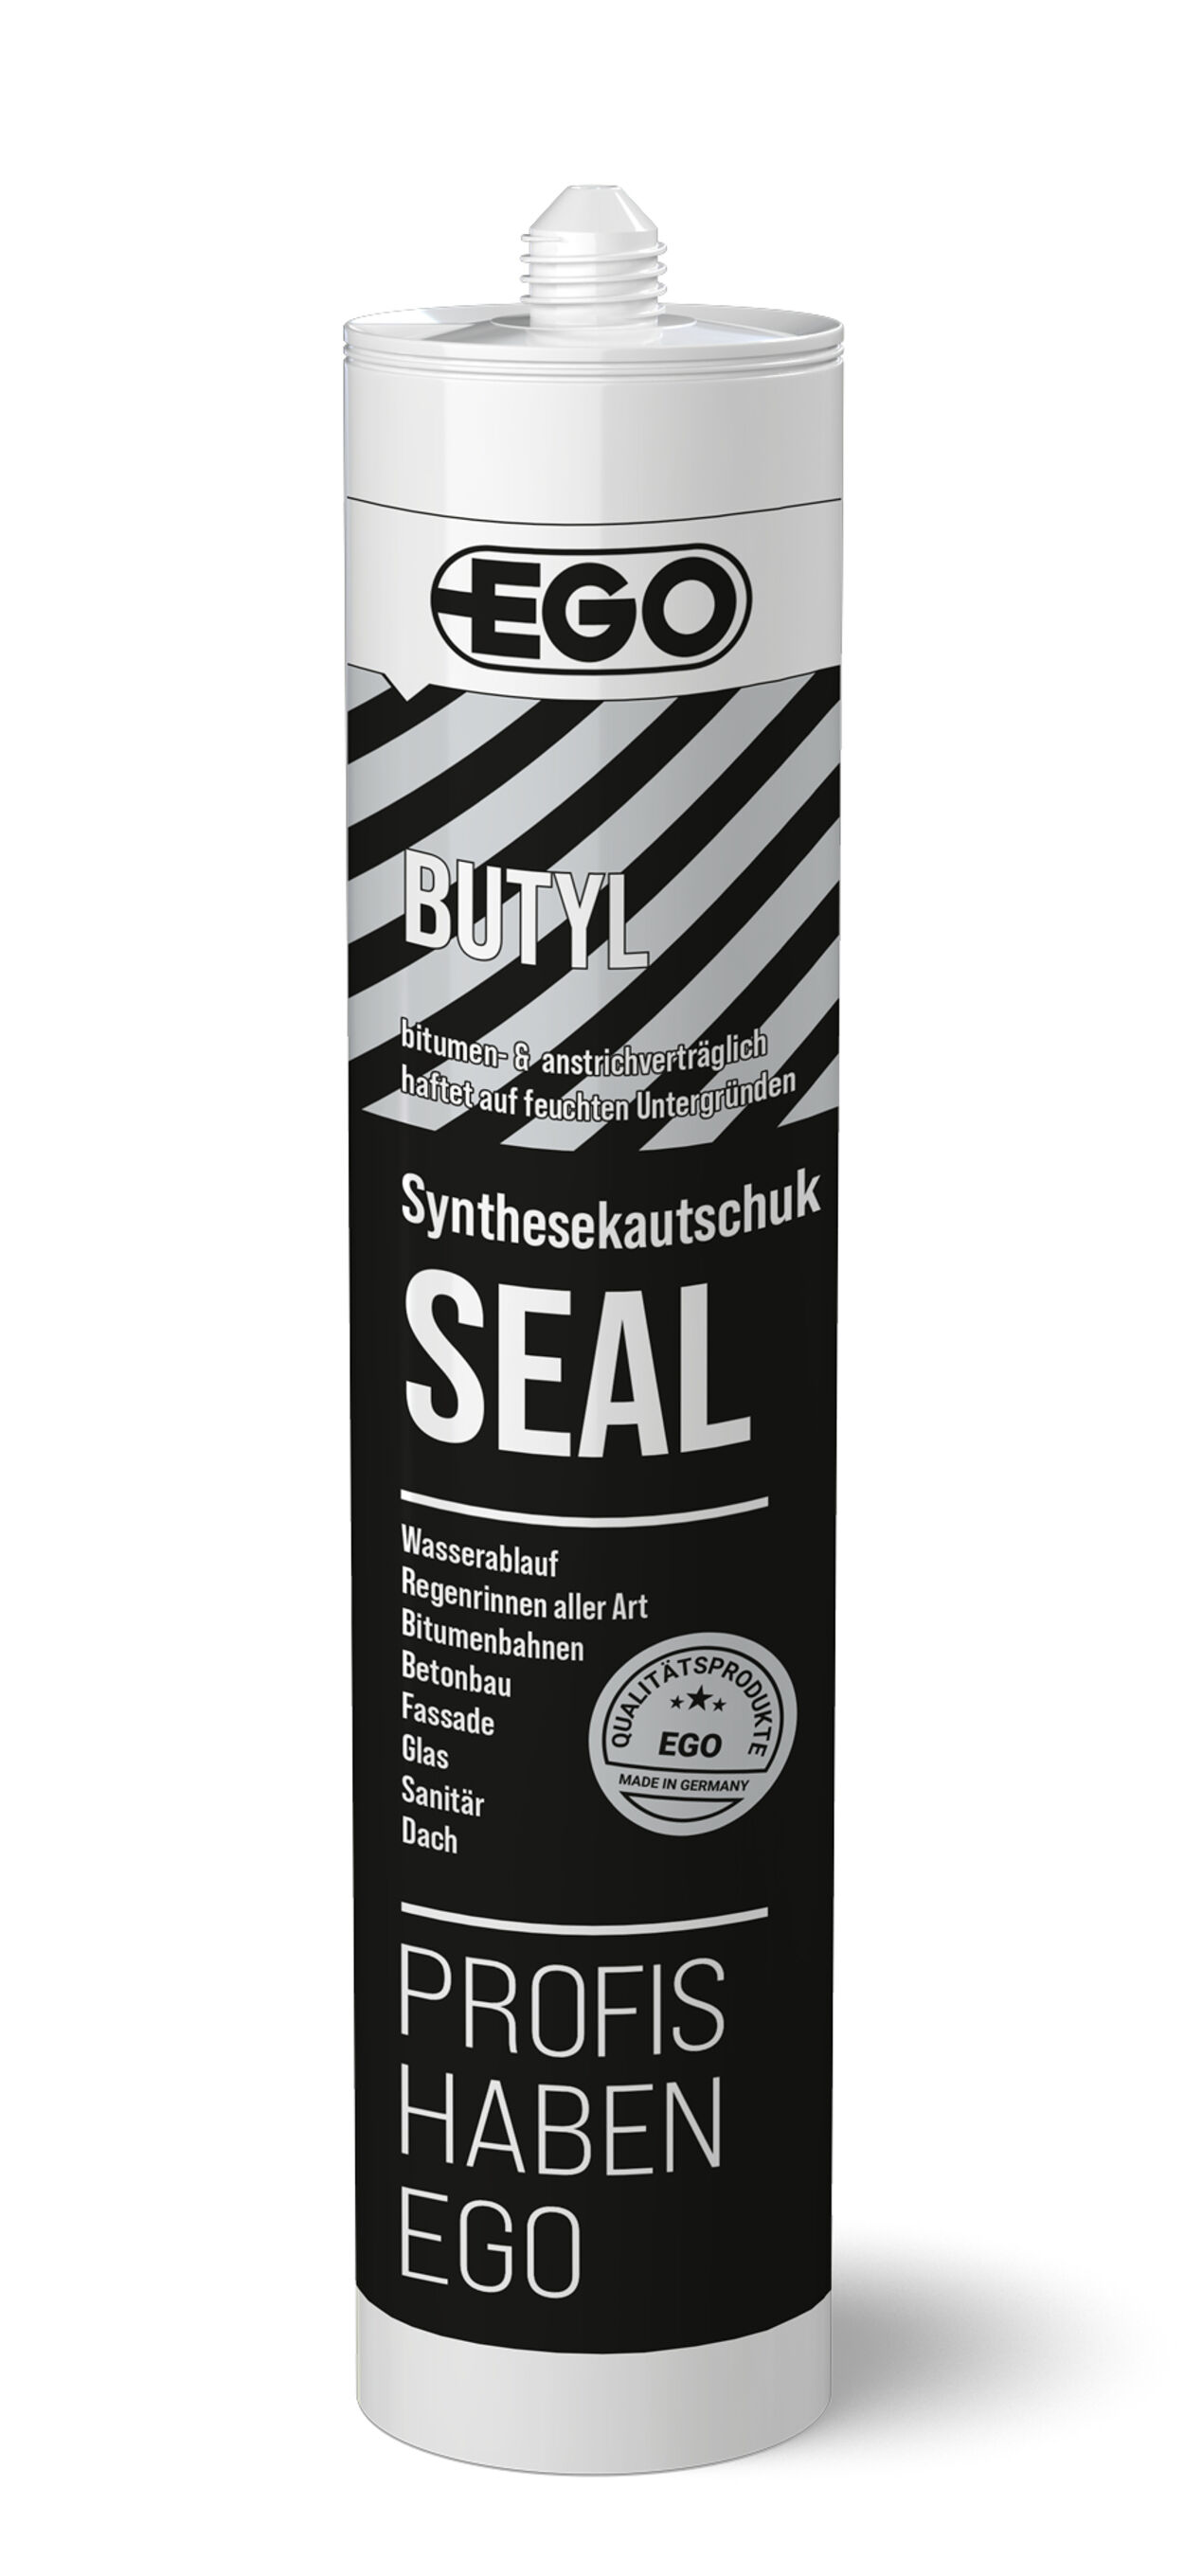 Butyl sealant for   wet substrates